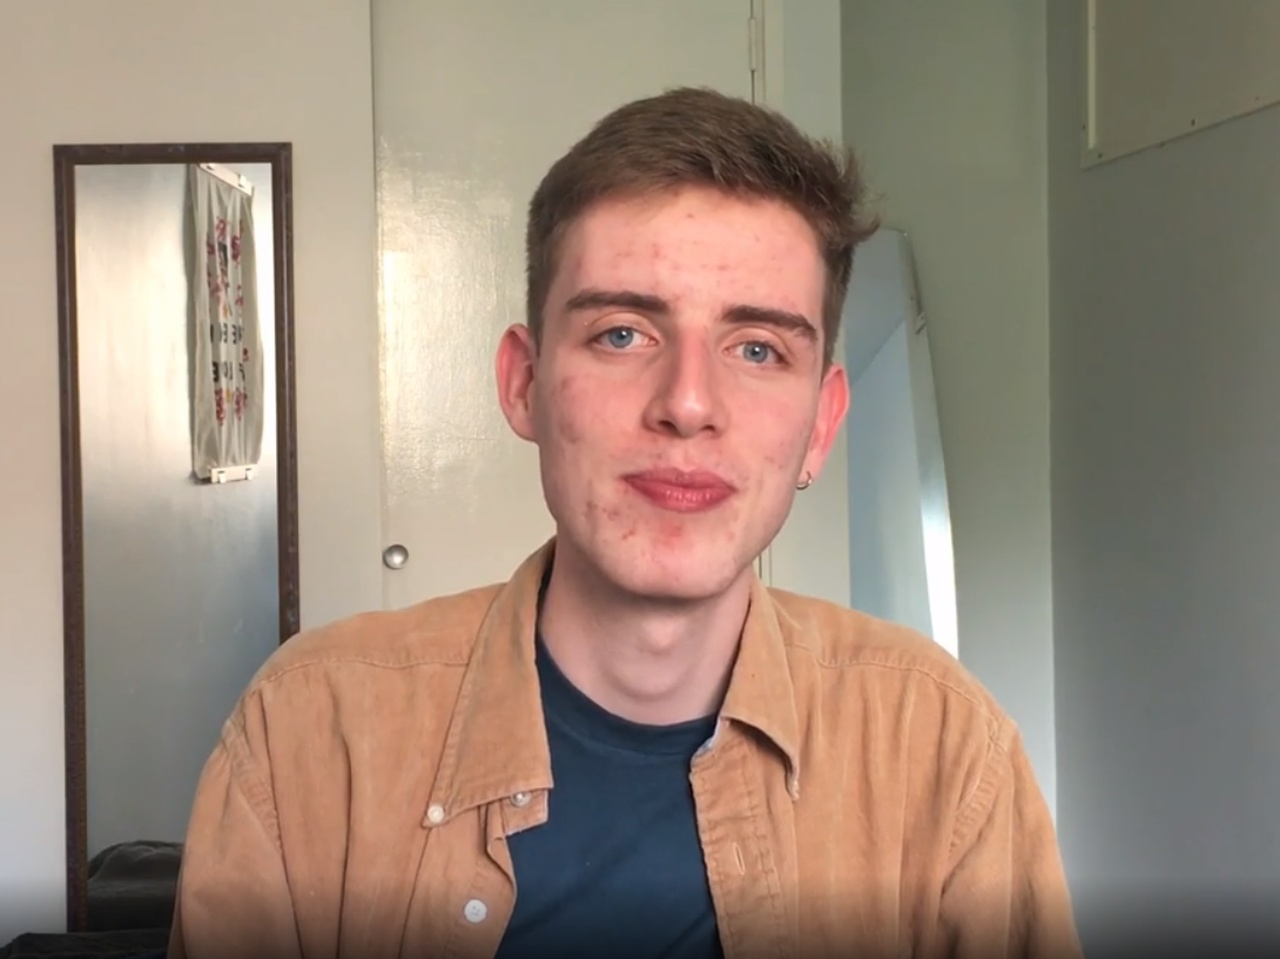 Watch third-year undergraduate student Rhydian talking about how his summer research project is shaping his future ambitions.